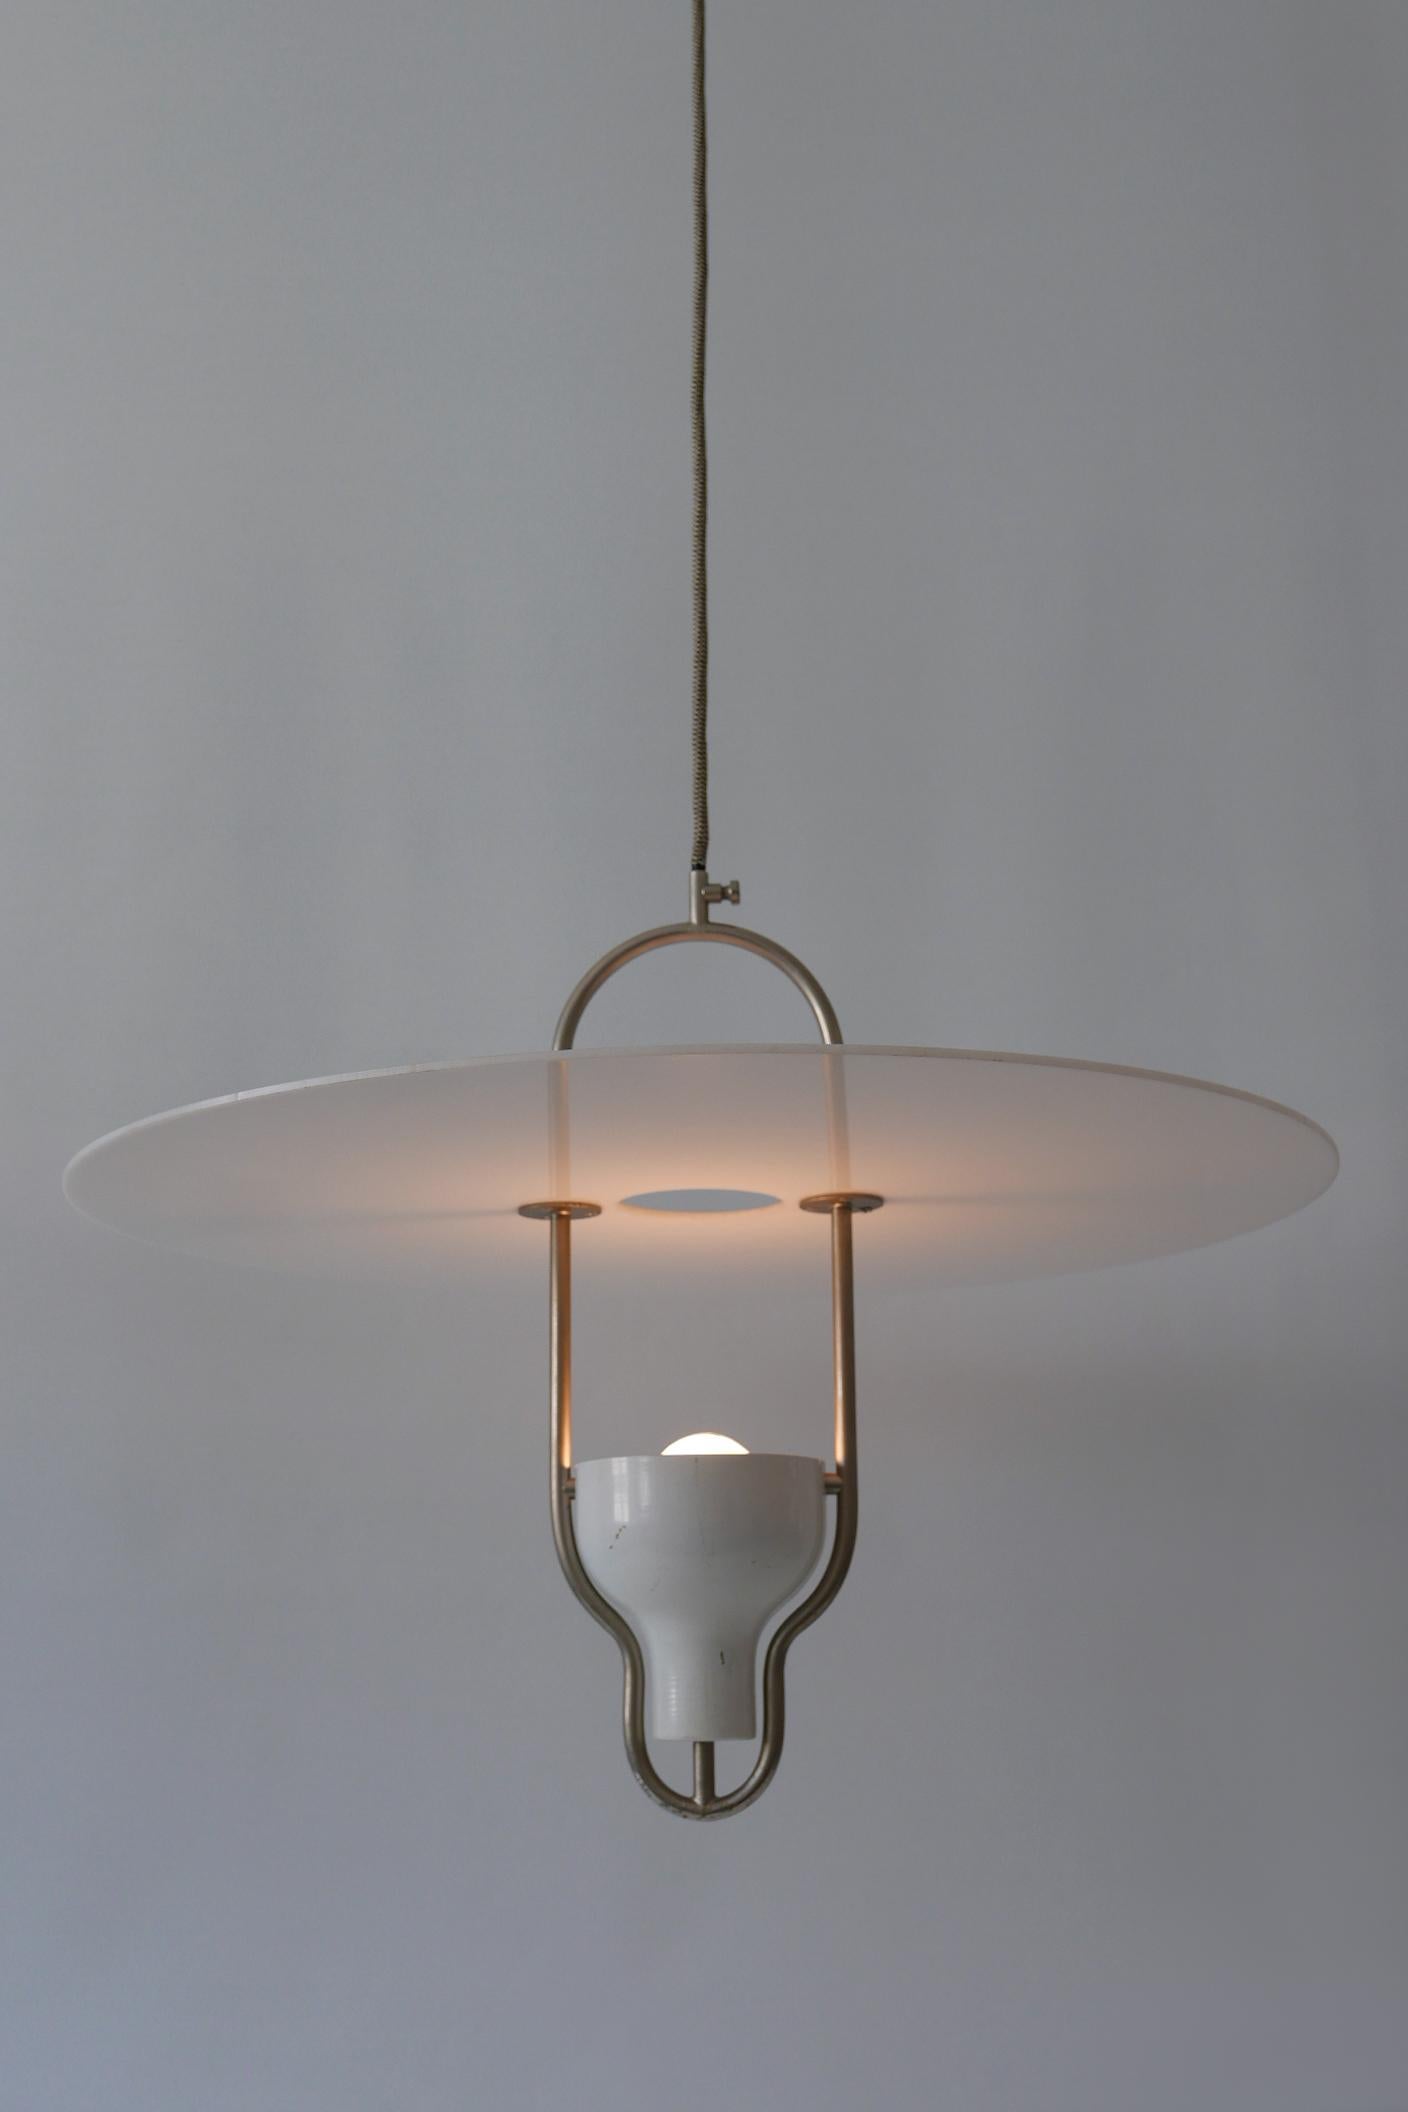 Exceptional Mid-Century Modern Ufo Pendant Lamp, Italy, 1960s For Sale 9